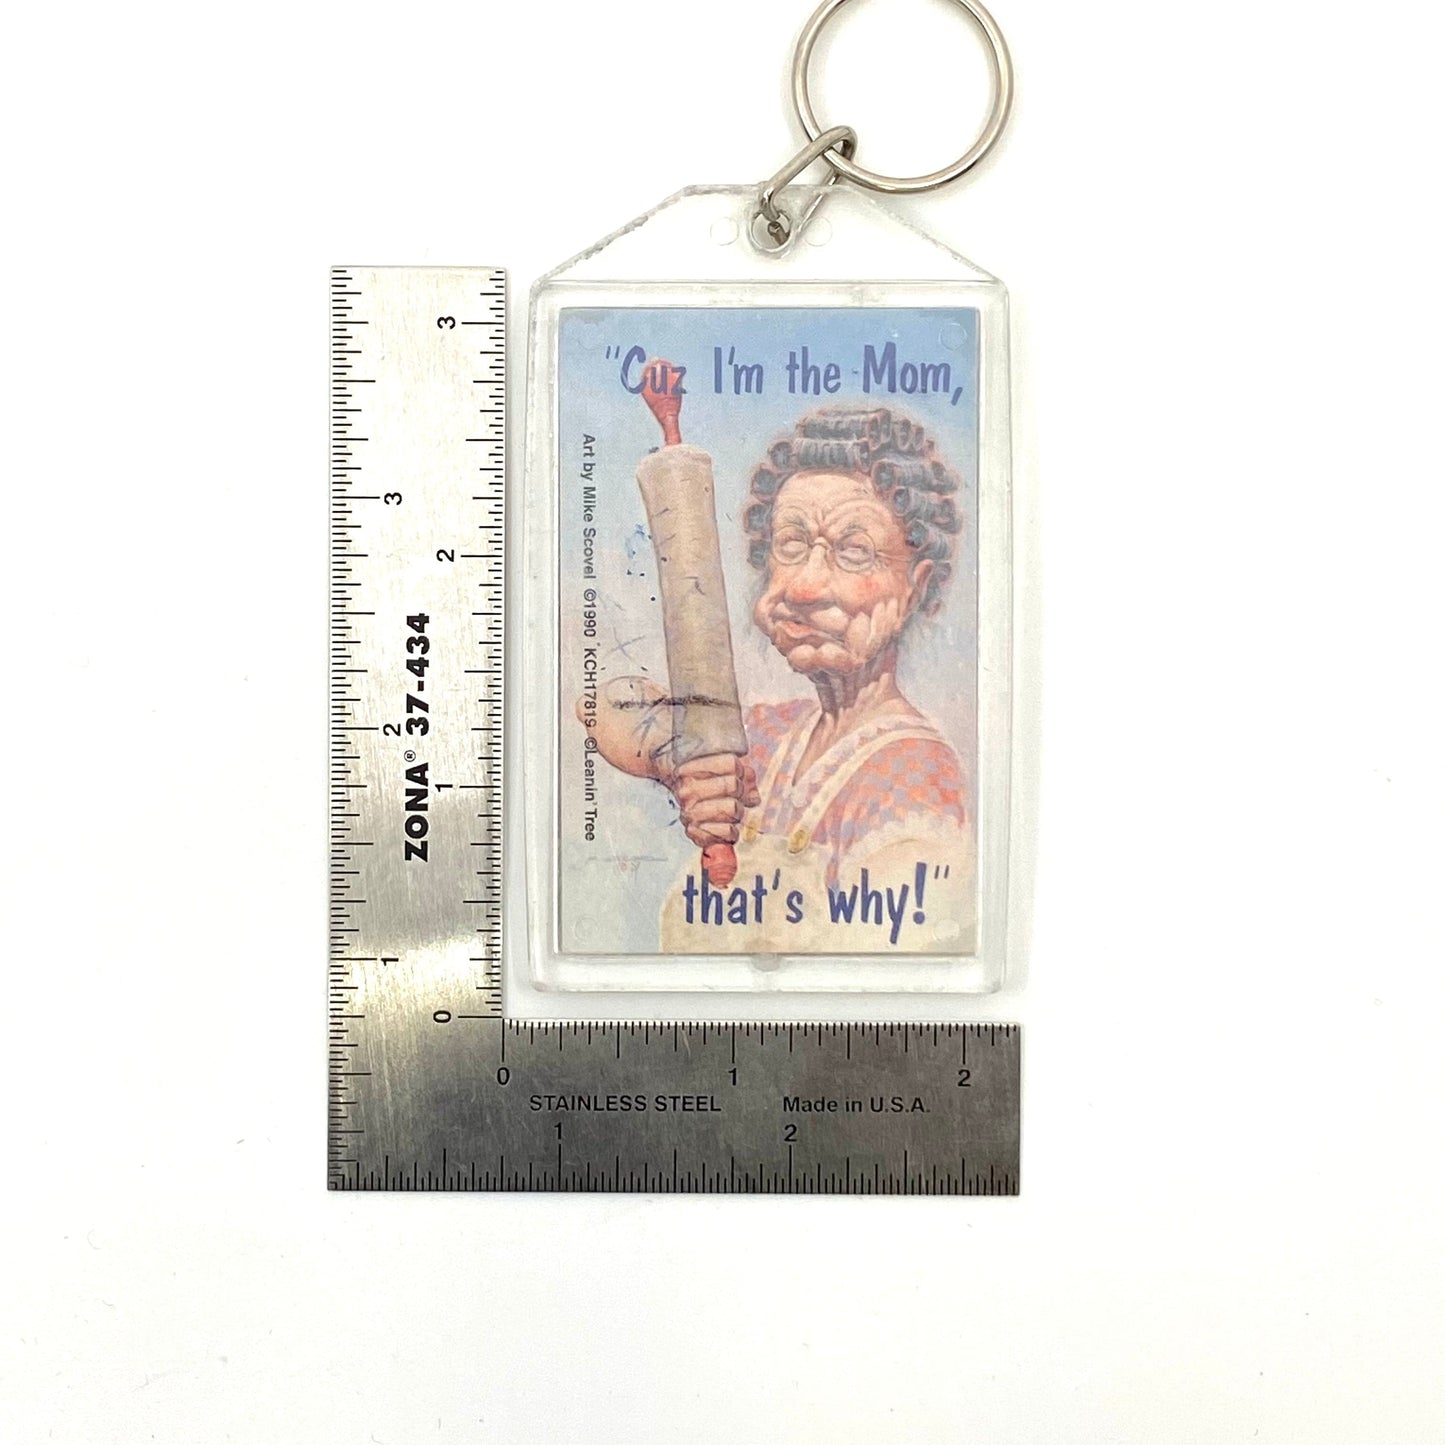 Vintage Novelty “Cuz I’m the Mom, that’s why!” Funny Clear Acrylic Keychain Large